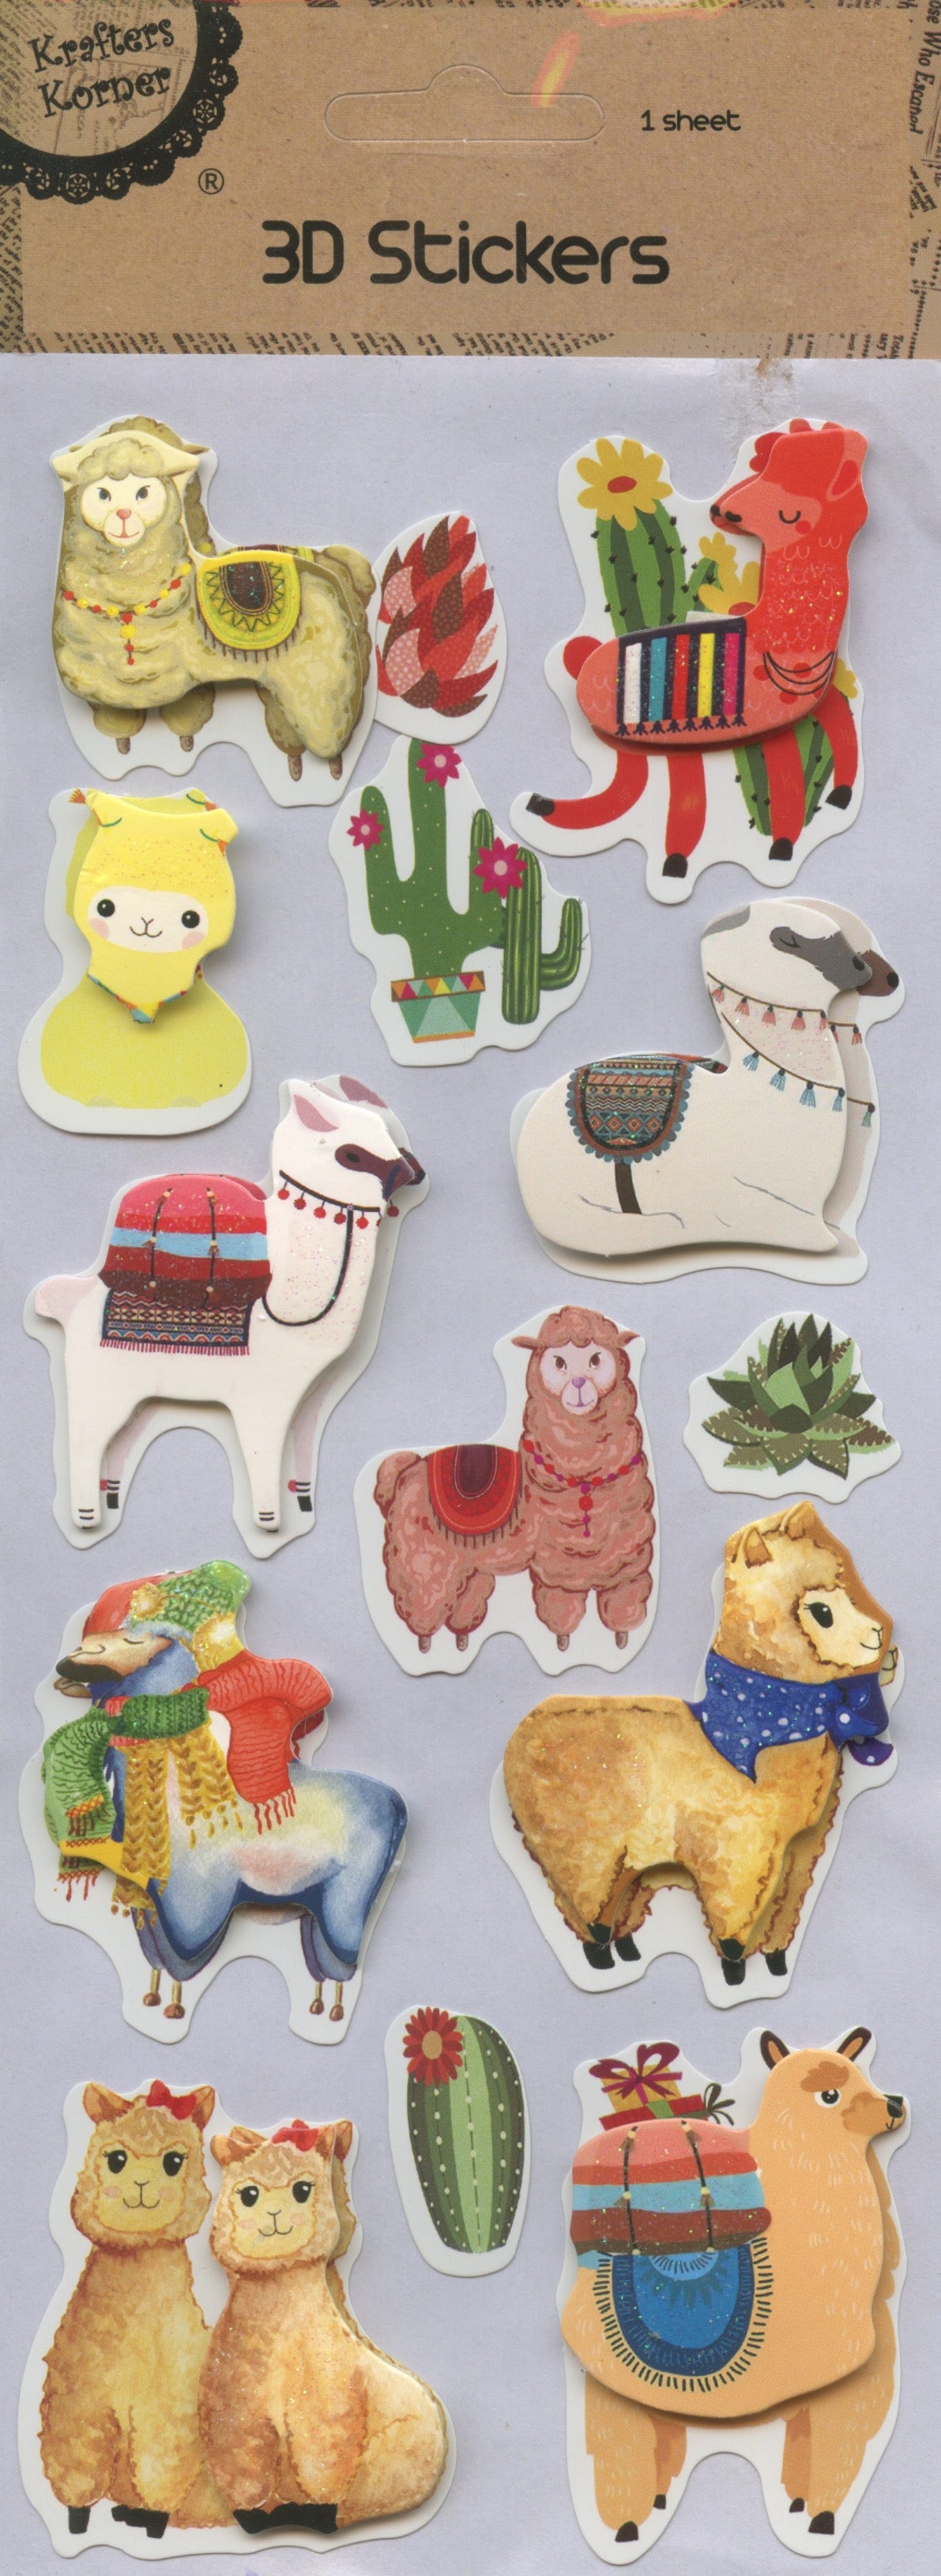 3D Stickers - Llamas With Scarves and Cacti - 13 pc